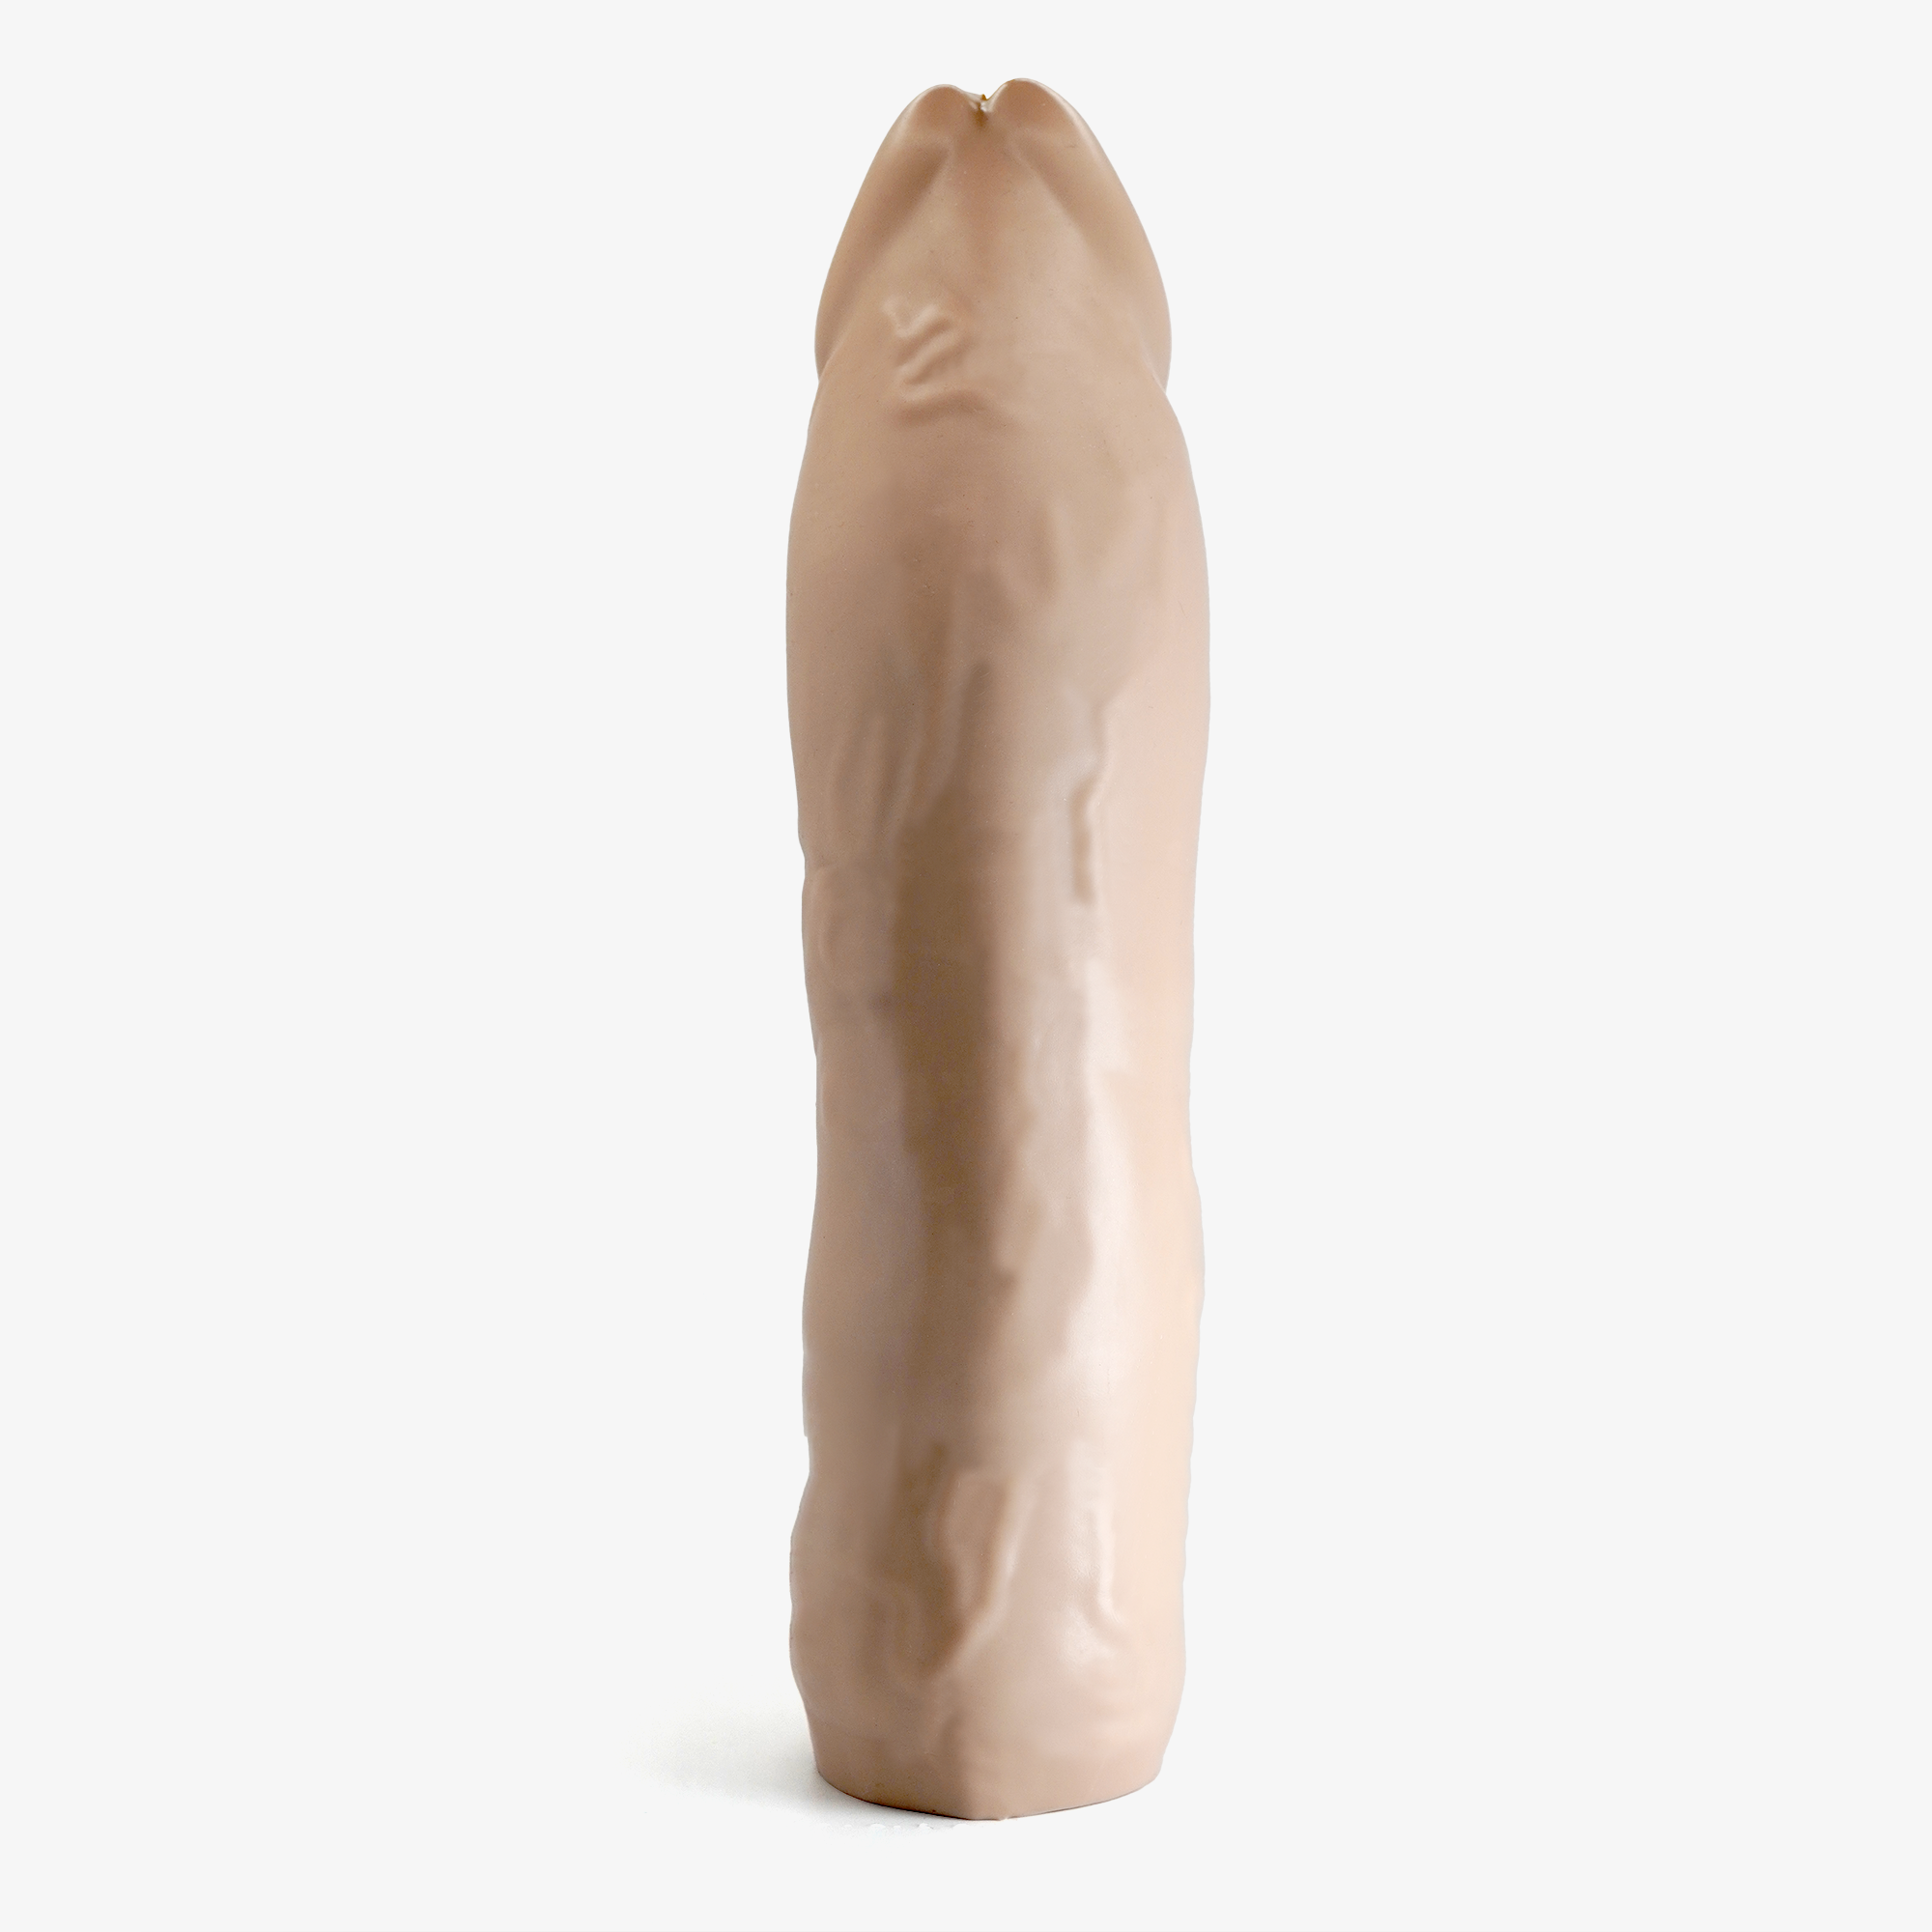 The Made To Measure Veiny One Penis Extender